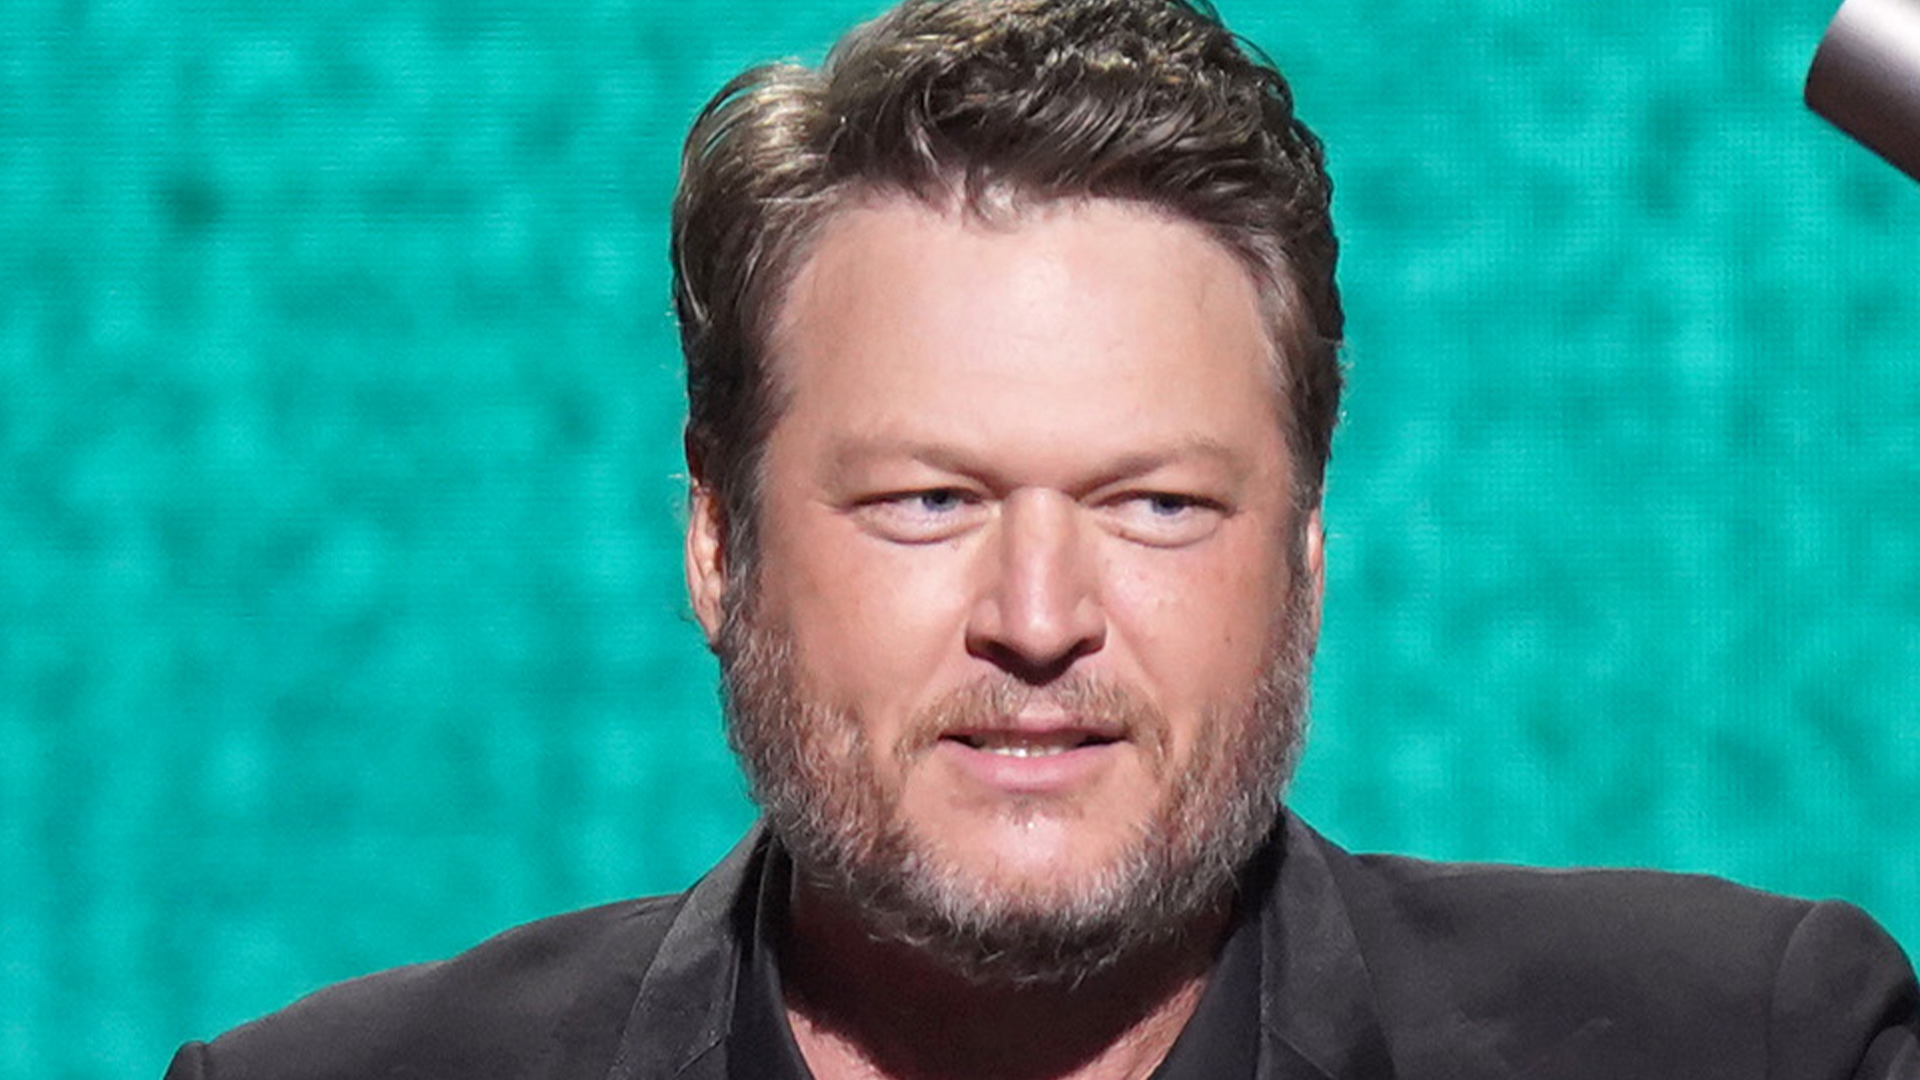 Blake Shelton promotes major career news away from The Voice